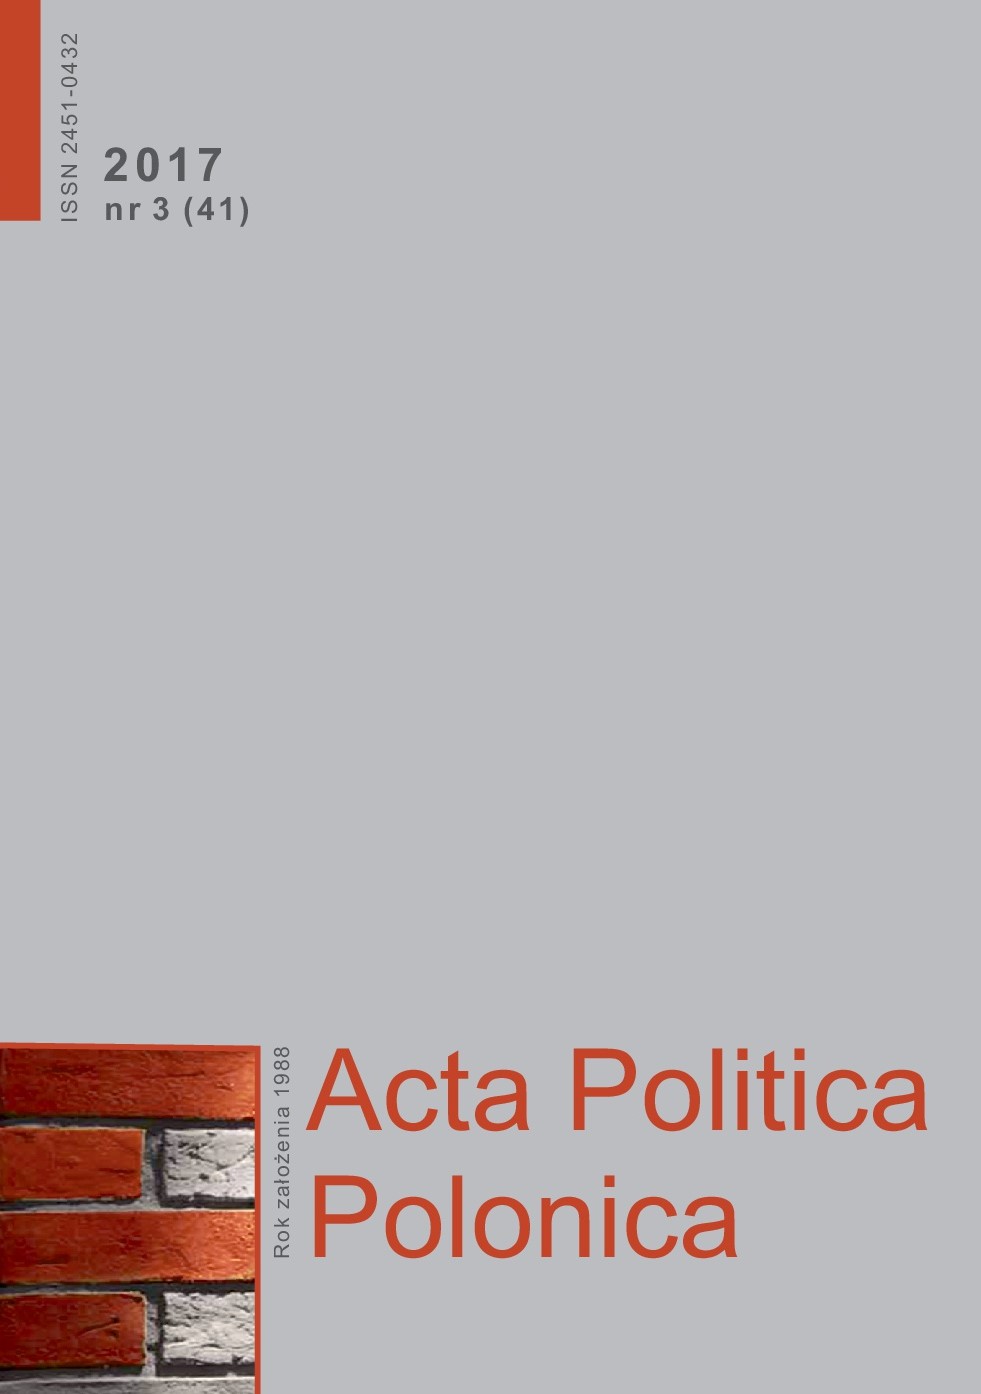 Banská Bystrica region – party bastion and source of the result of L’SNS in 2016 election? Cover Image